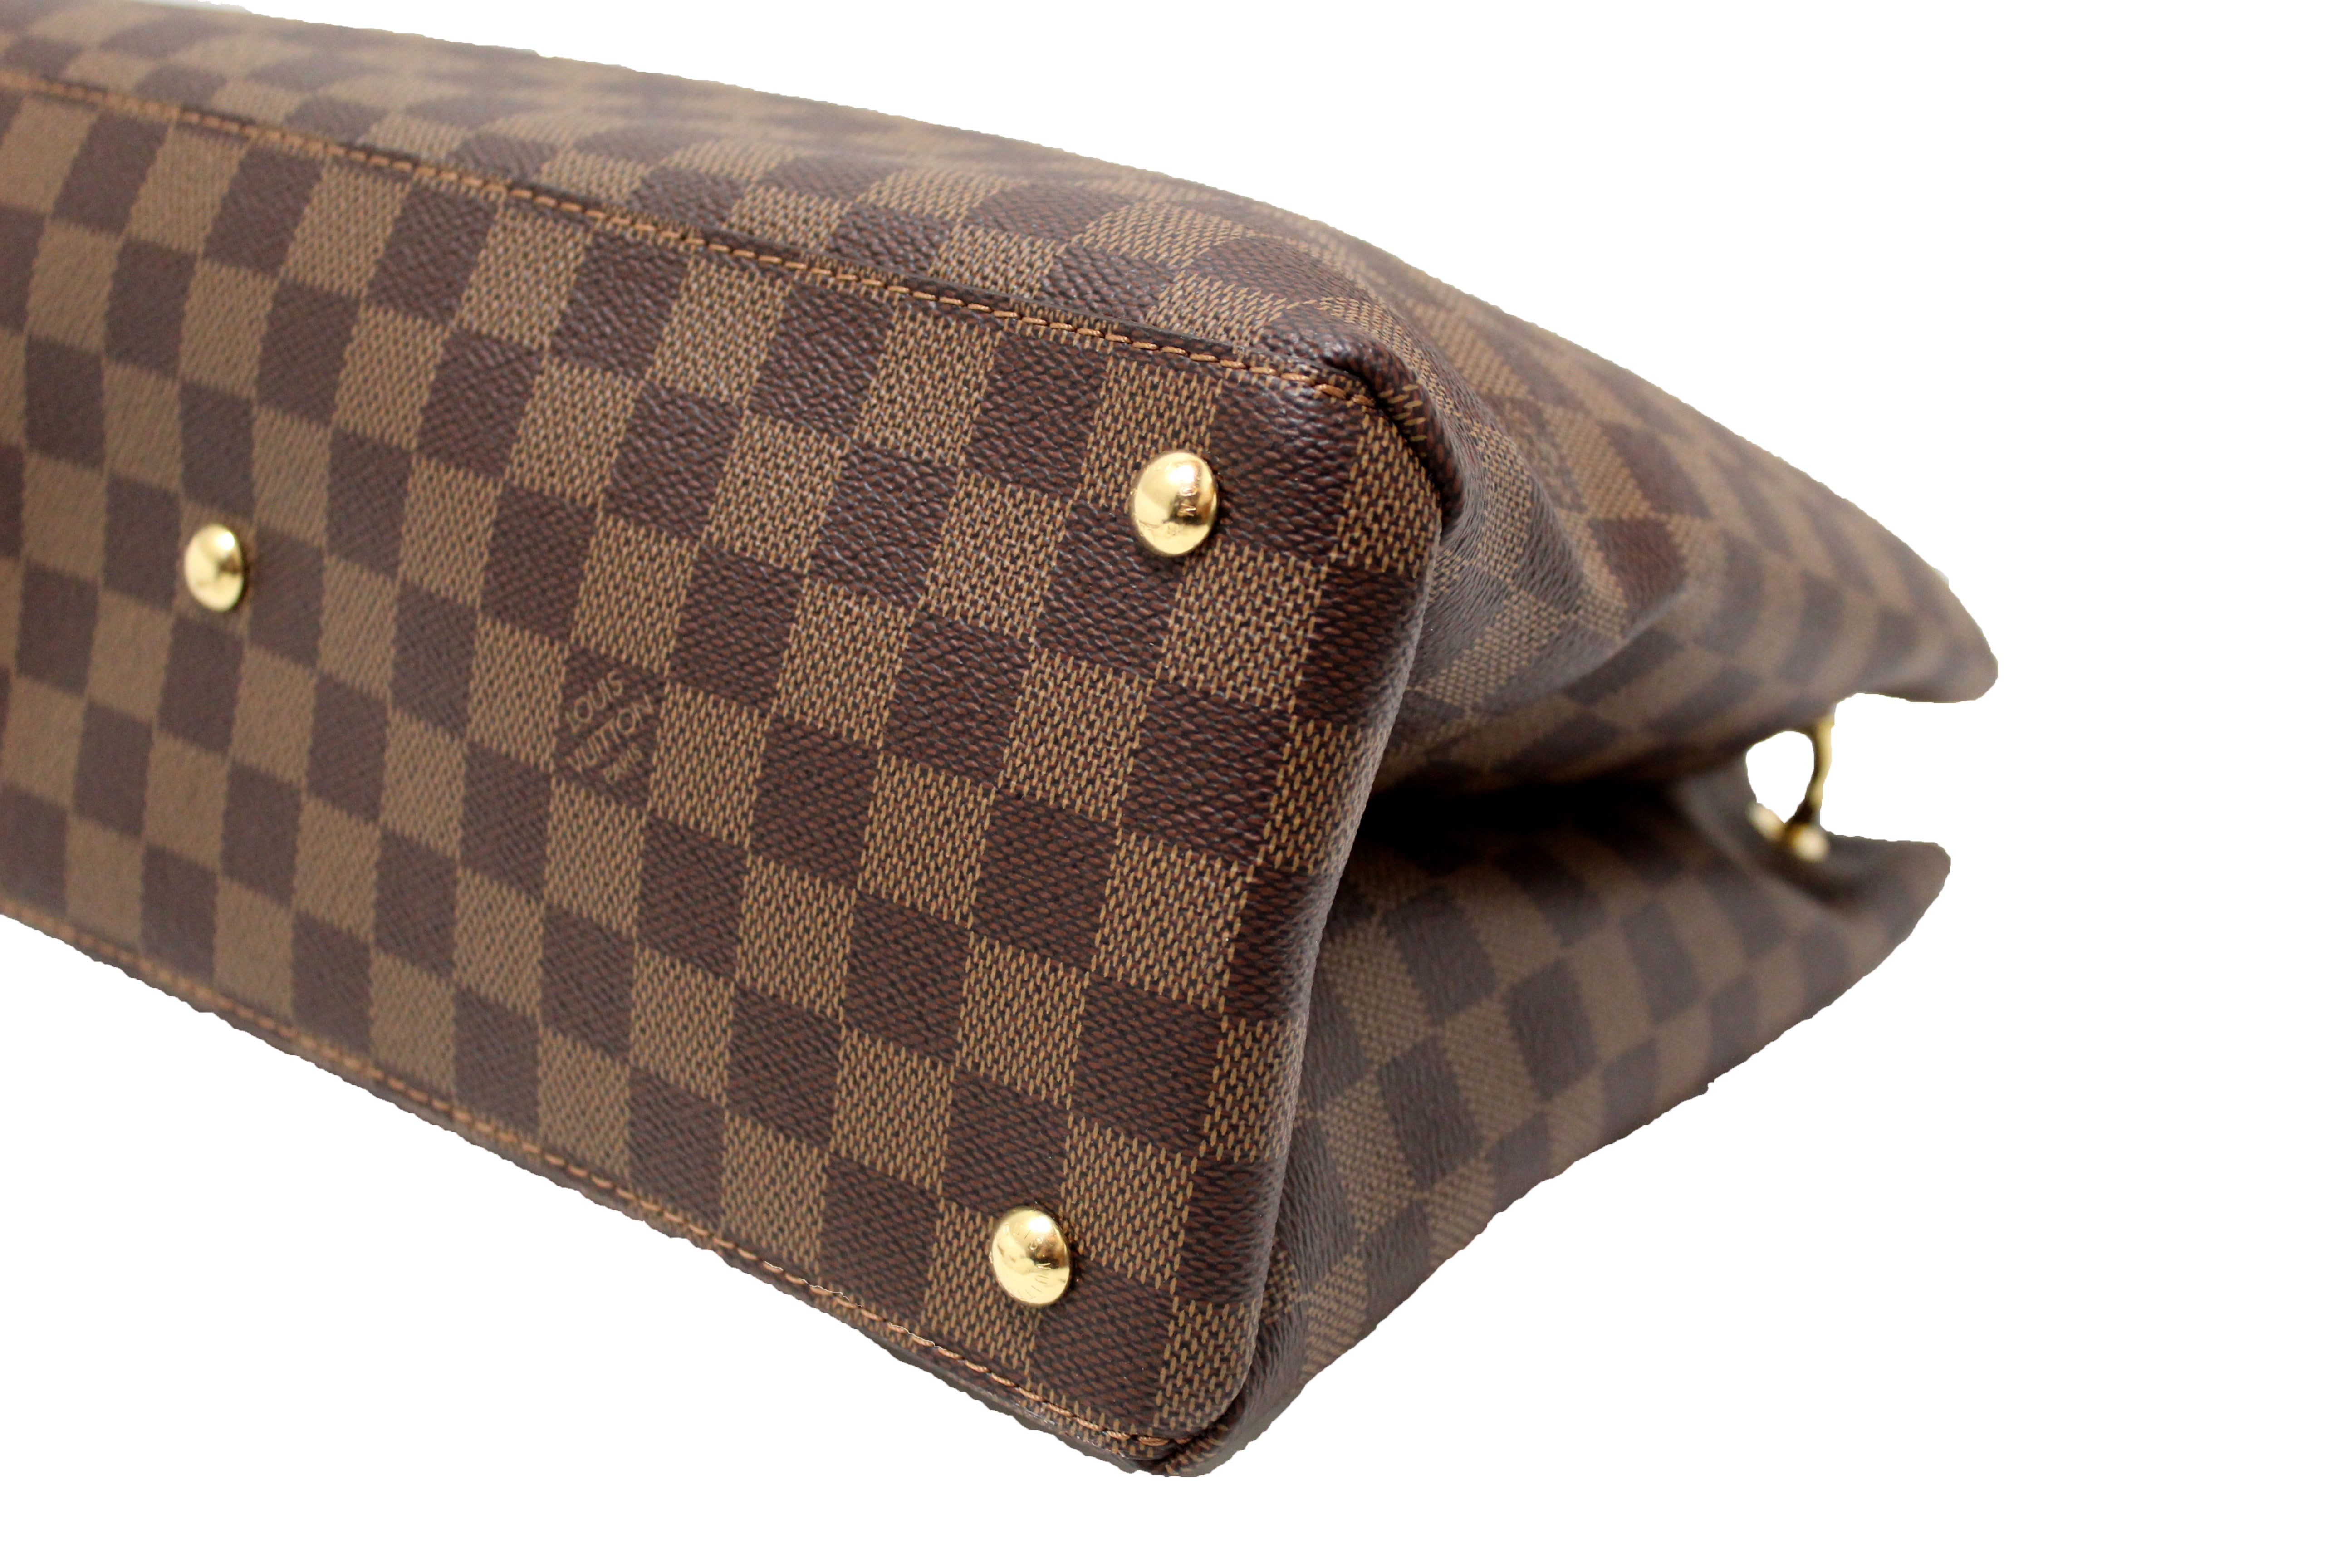 Authentic Louis Vuitton Damier Ebene Canvas with Brown Leather Riverside Bag